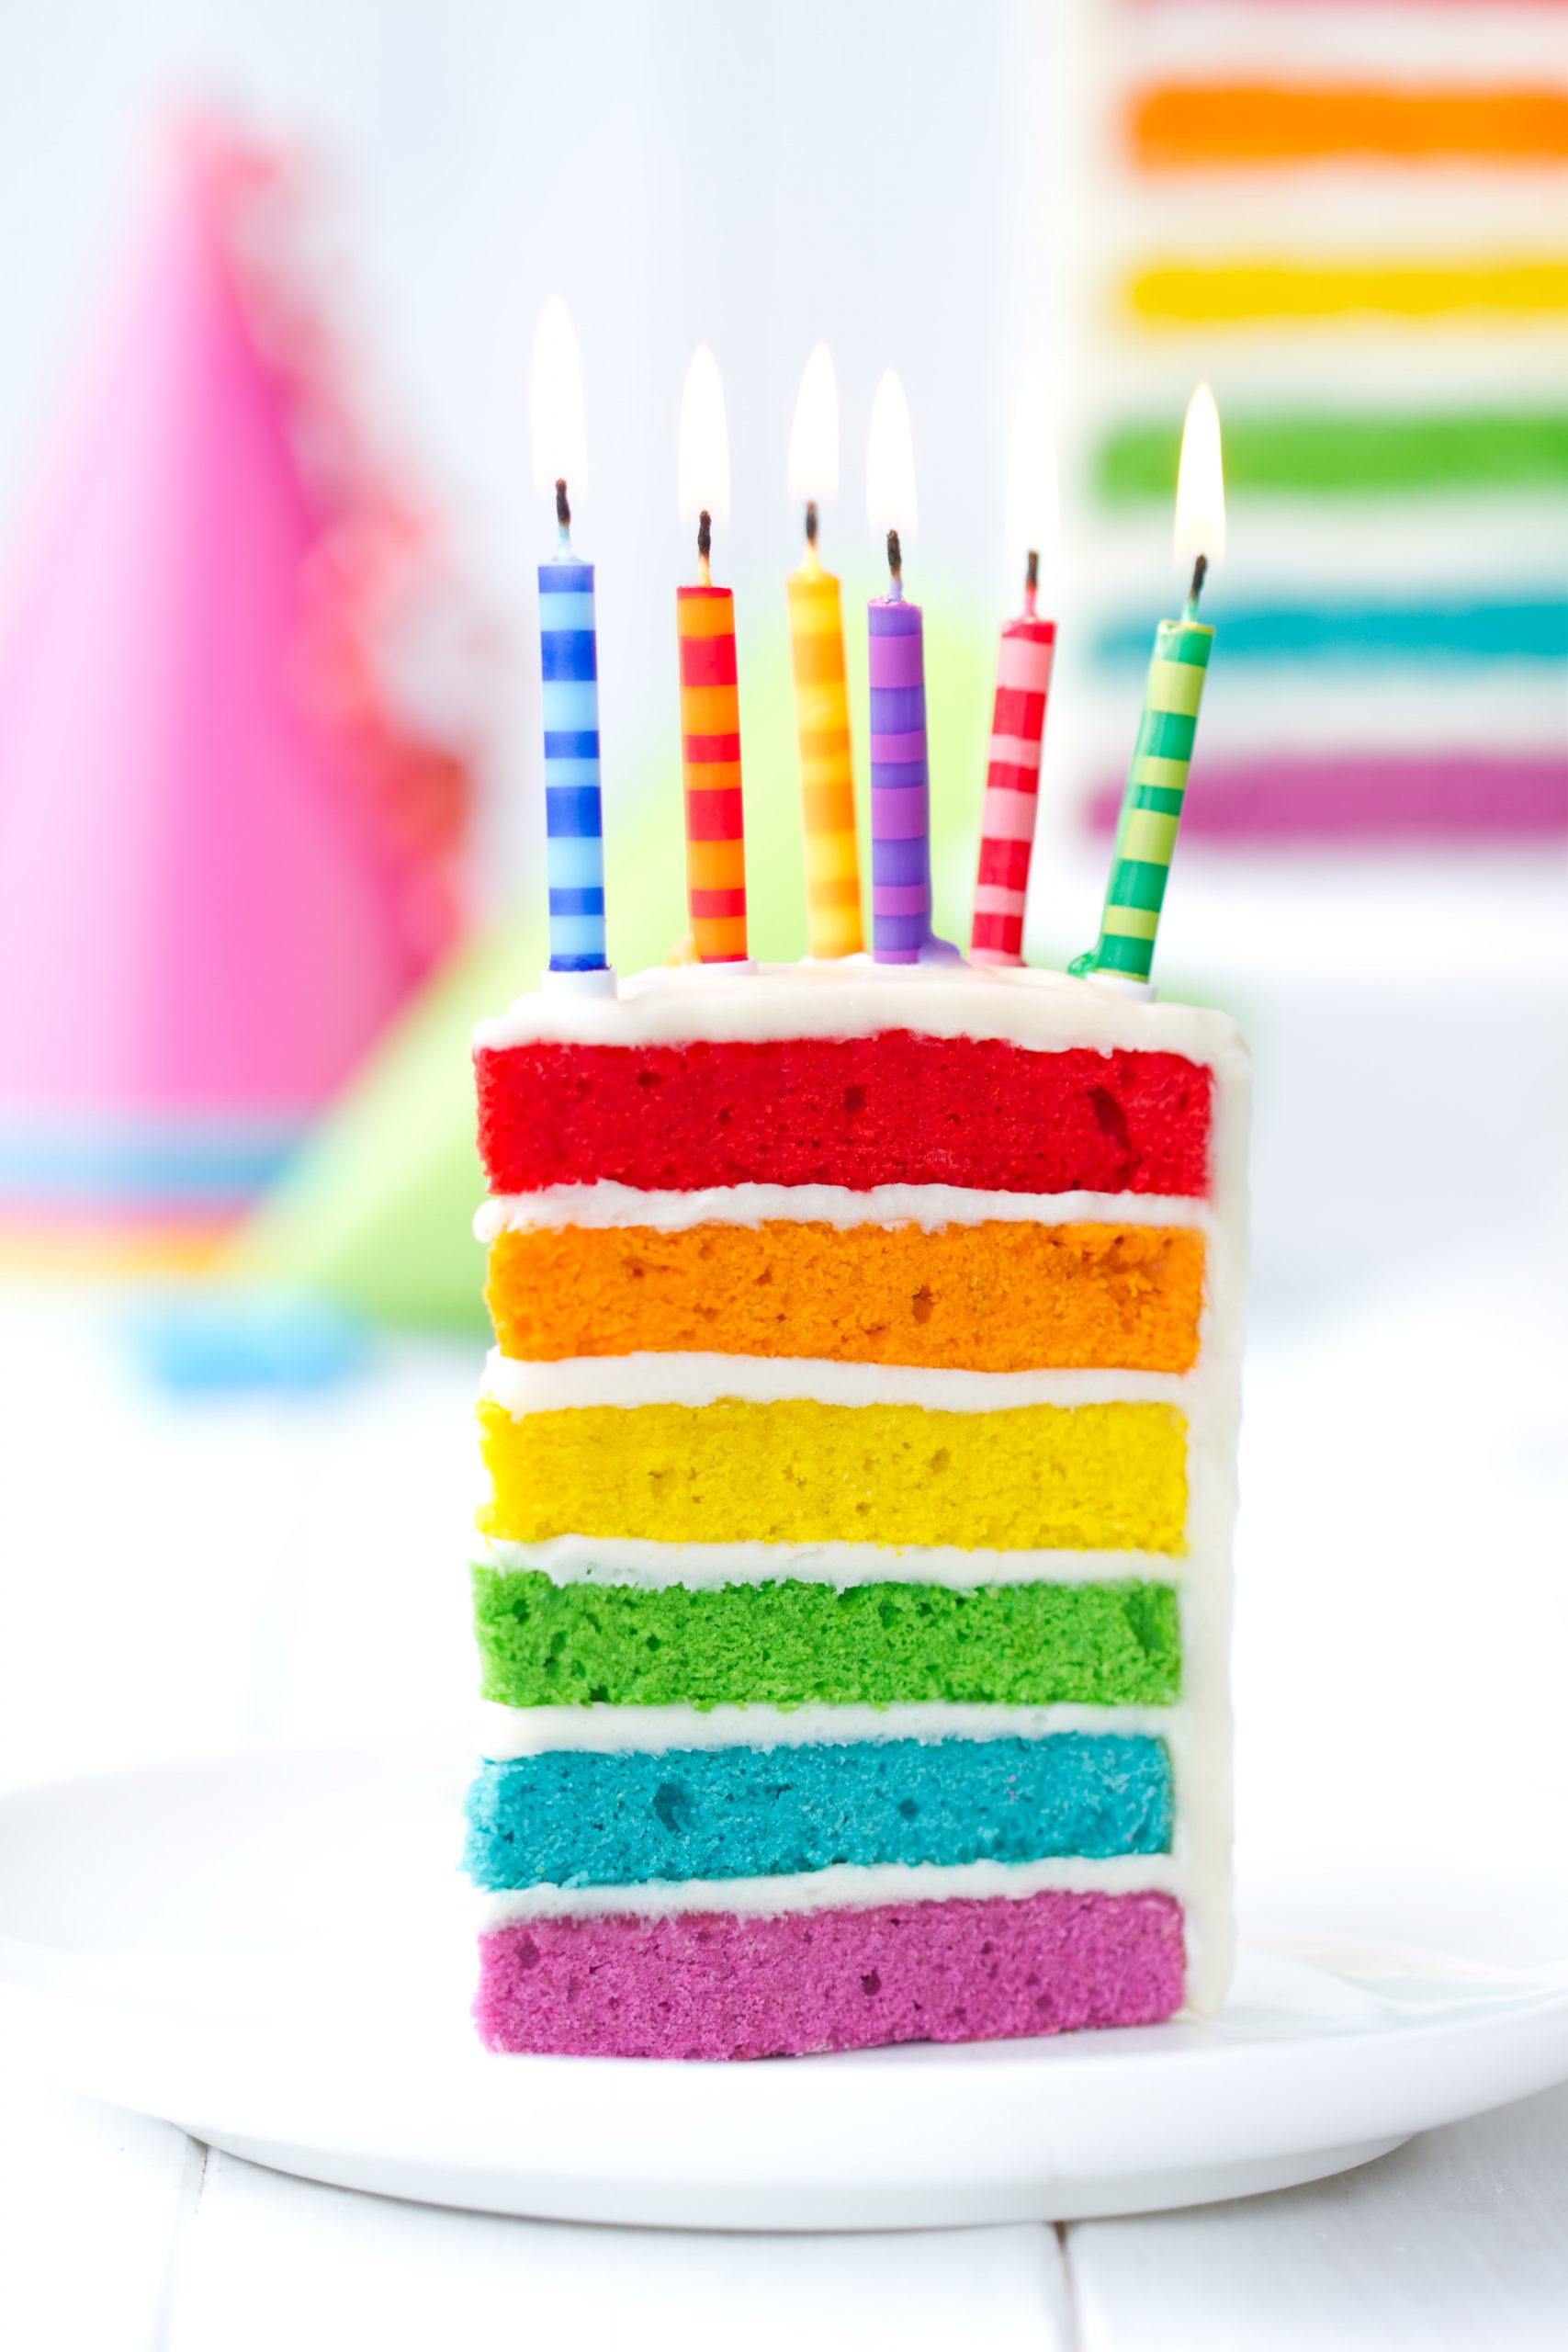 Short-cut tips to a bright & beautiful yet easy Rainbow Cake. Makes a fun birthday or any occasion extra special. #baking #recipe #dessert